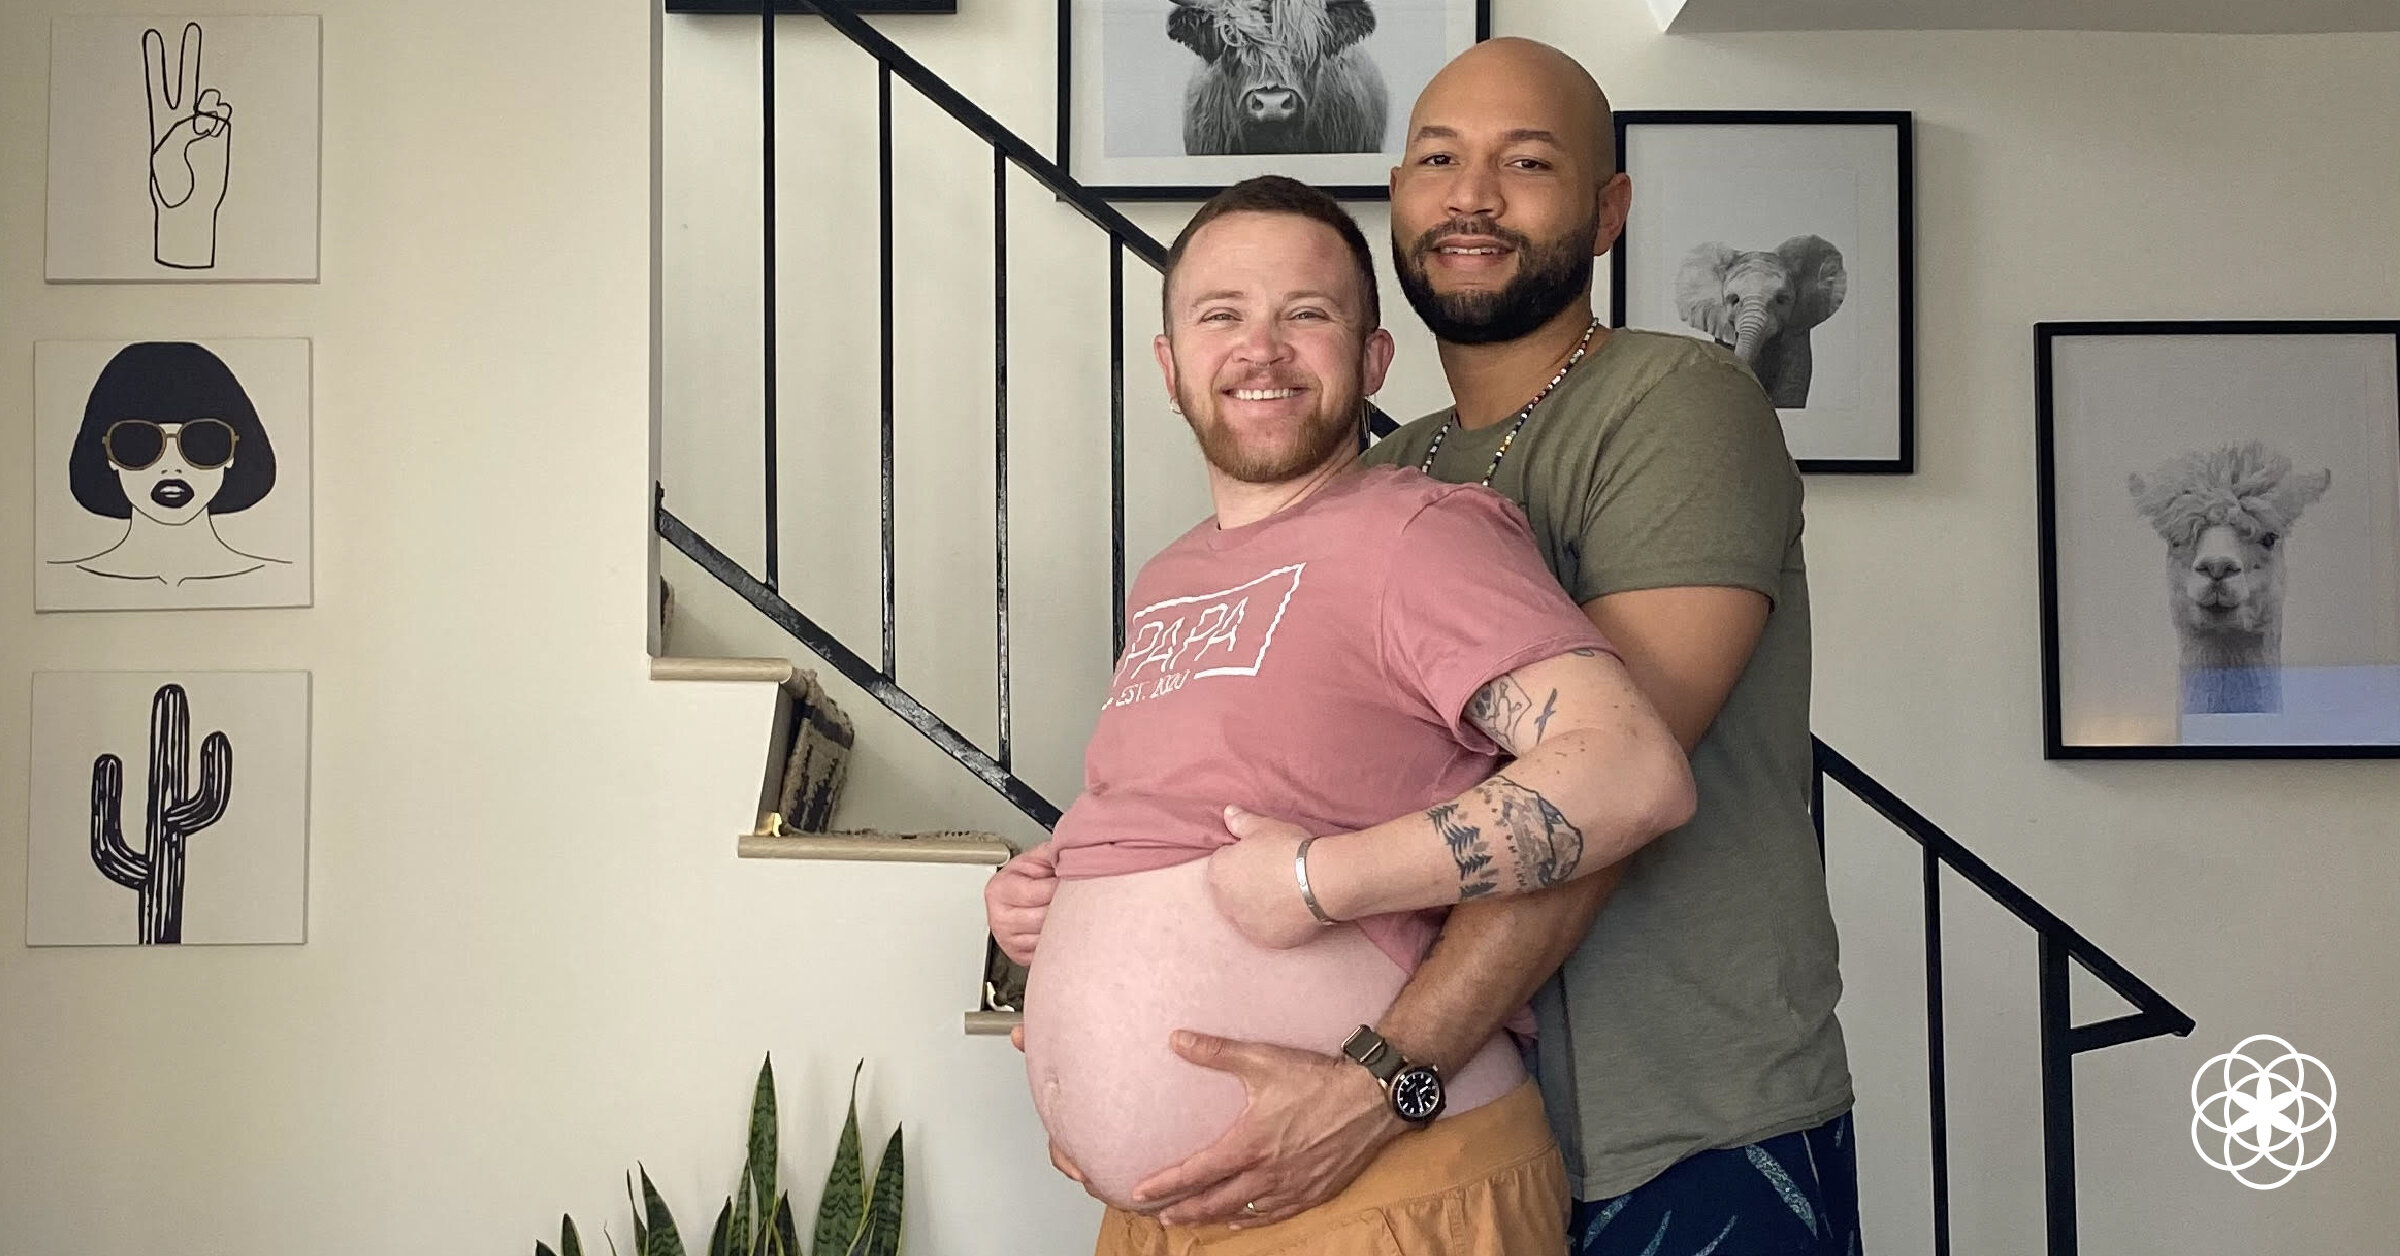 What its like to be pregnant as a transmasculine person